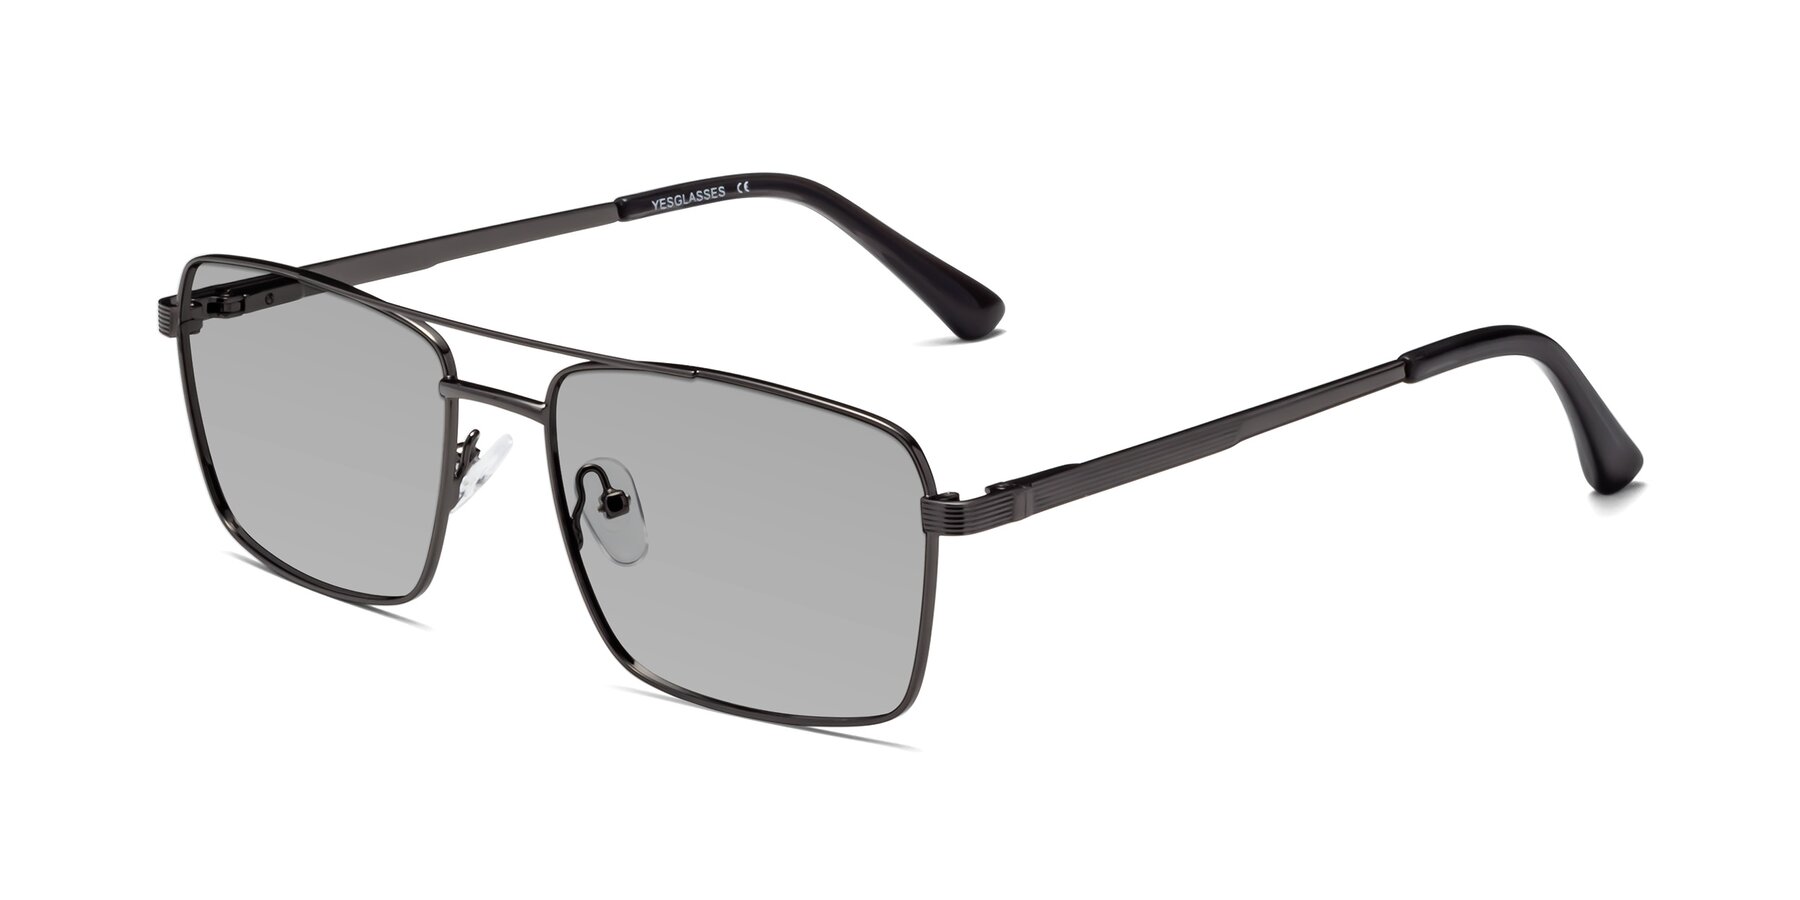 Angle of Beckum in Gunmetal with Light Gray Tinted Lenses